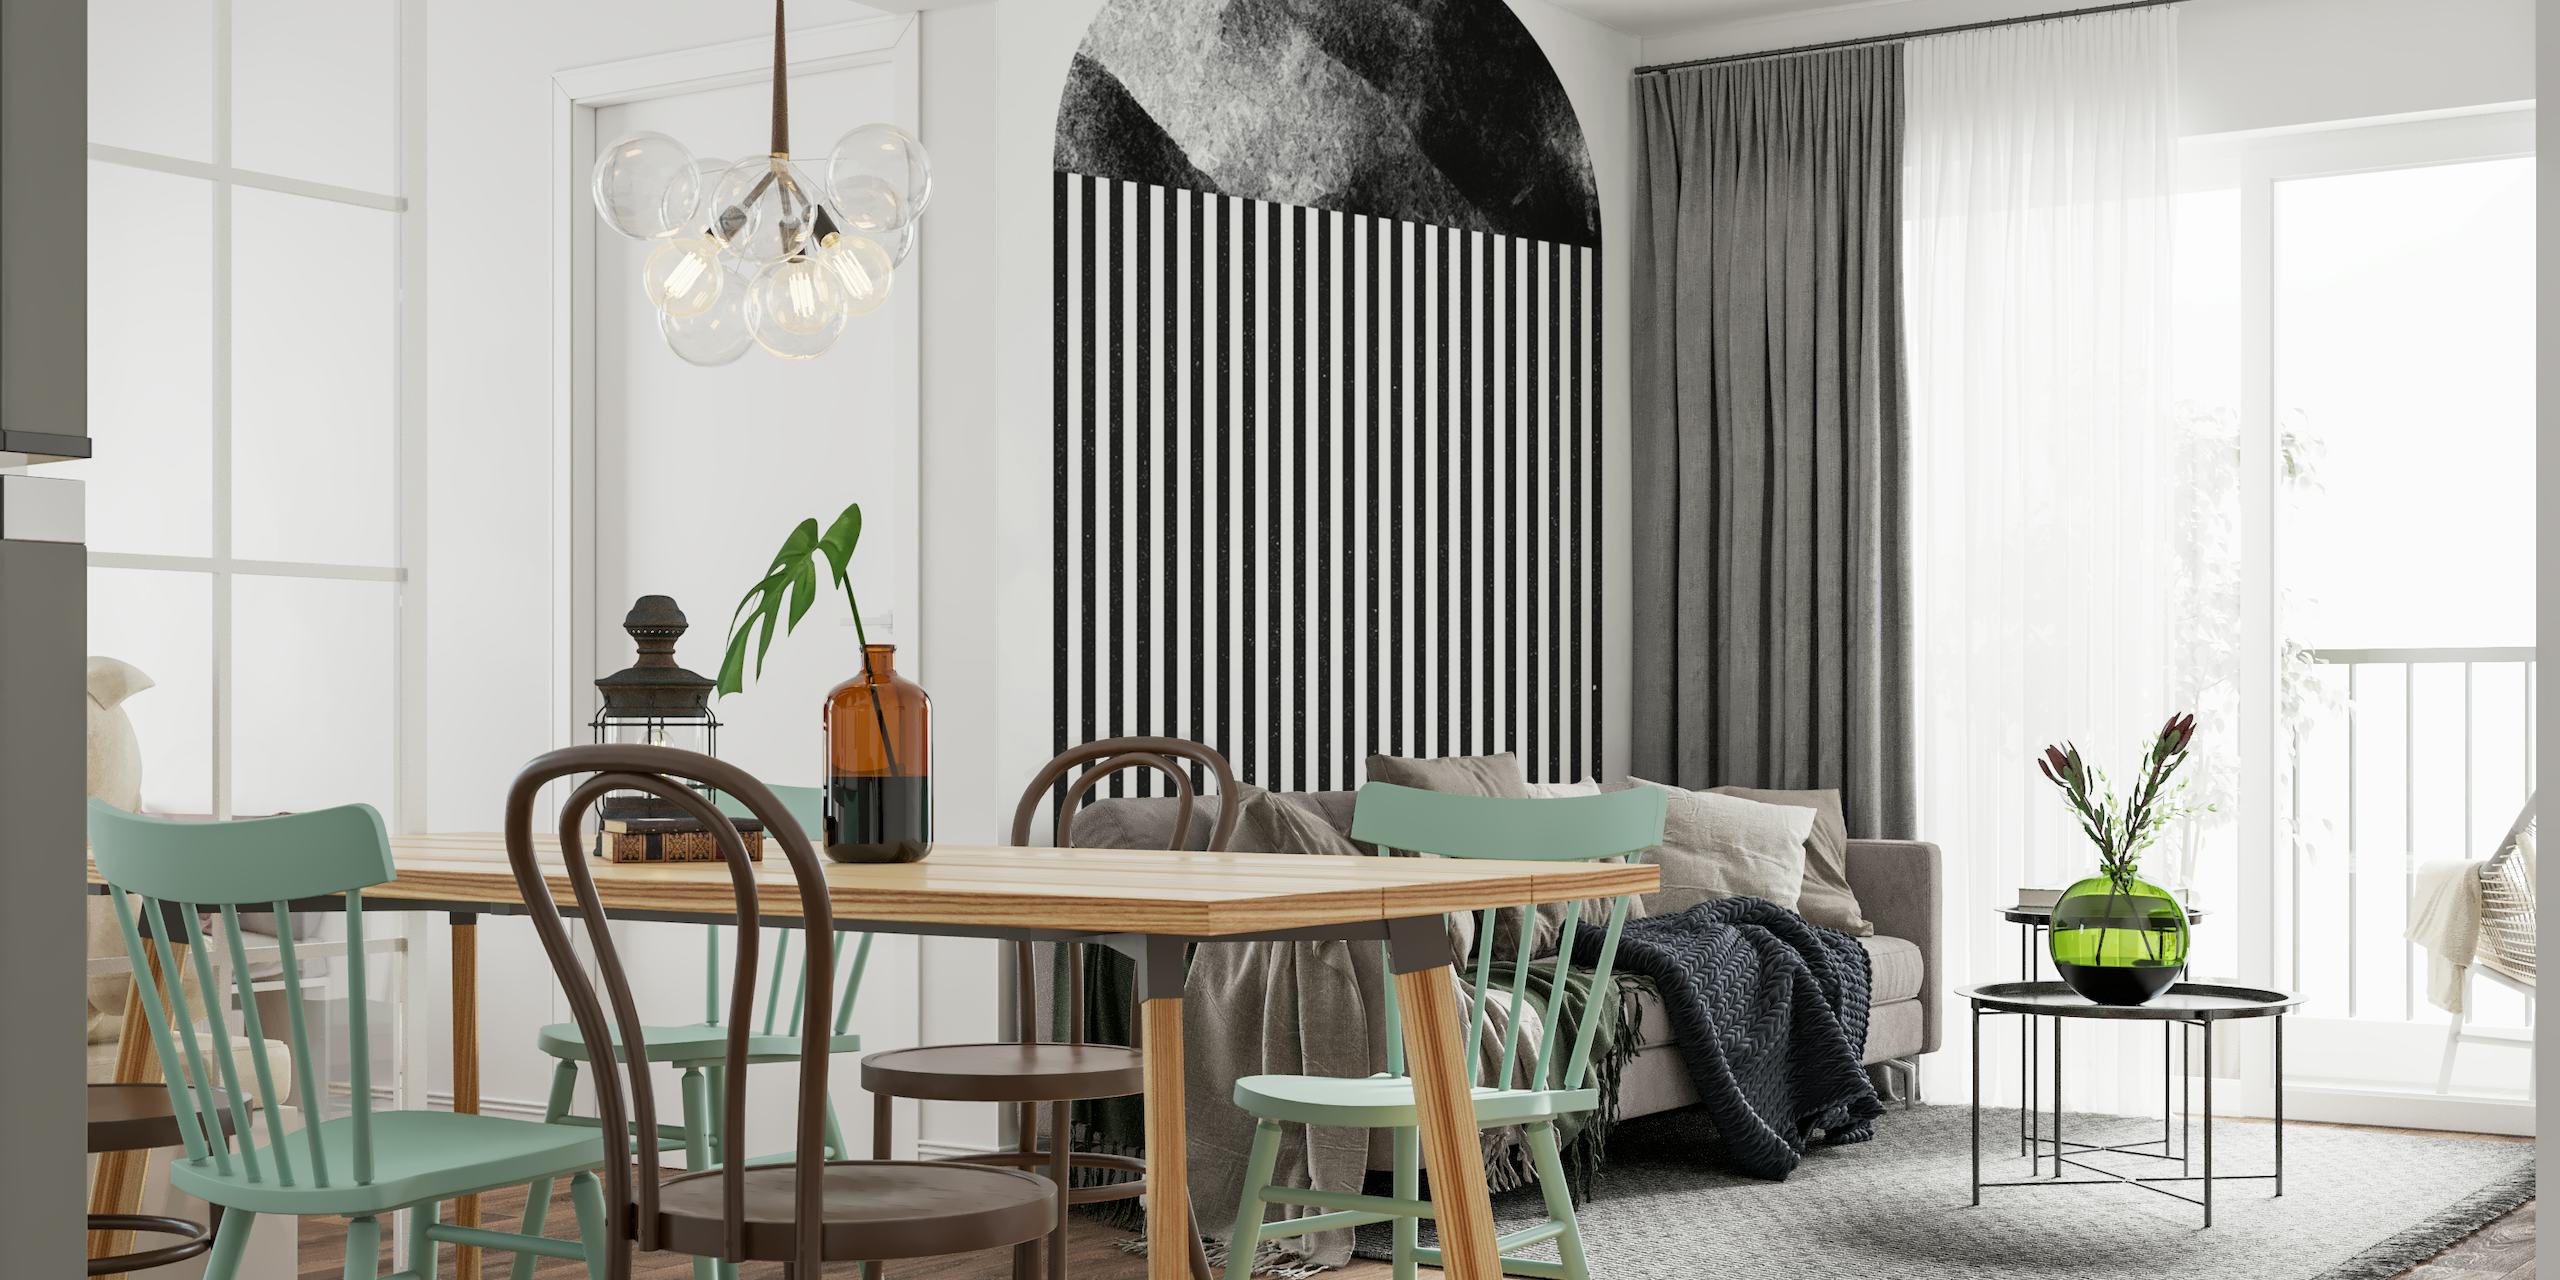 Black and white abstract geometric wall mural with vertical lines and celestial elements